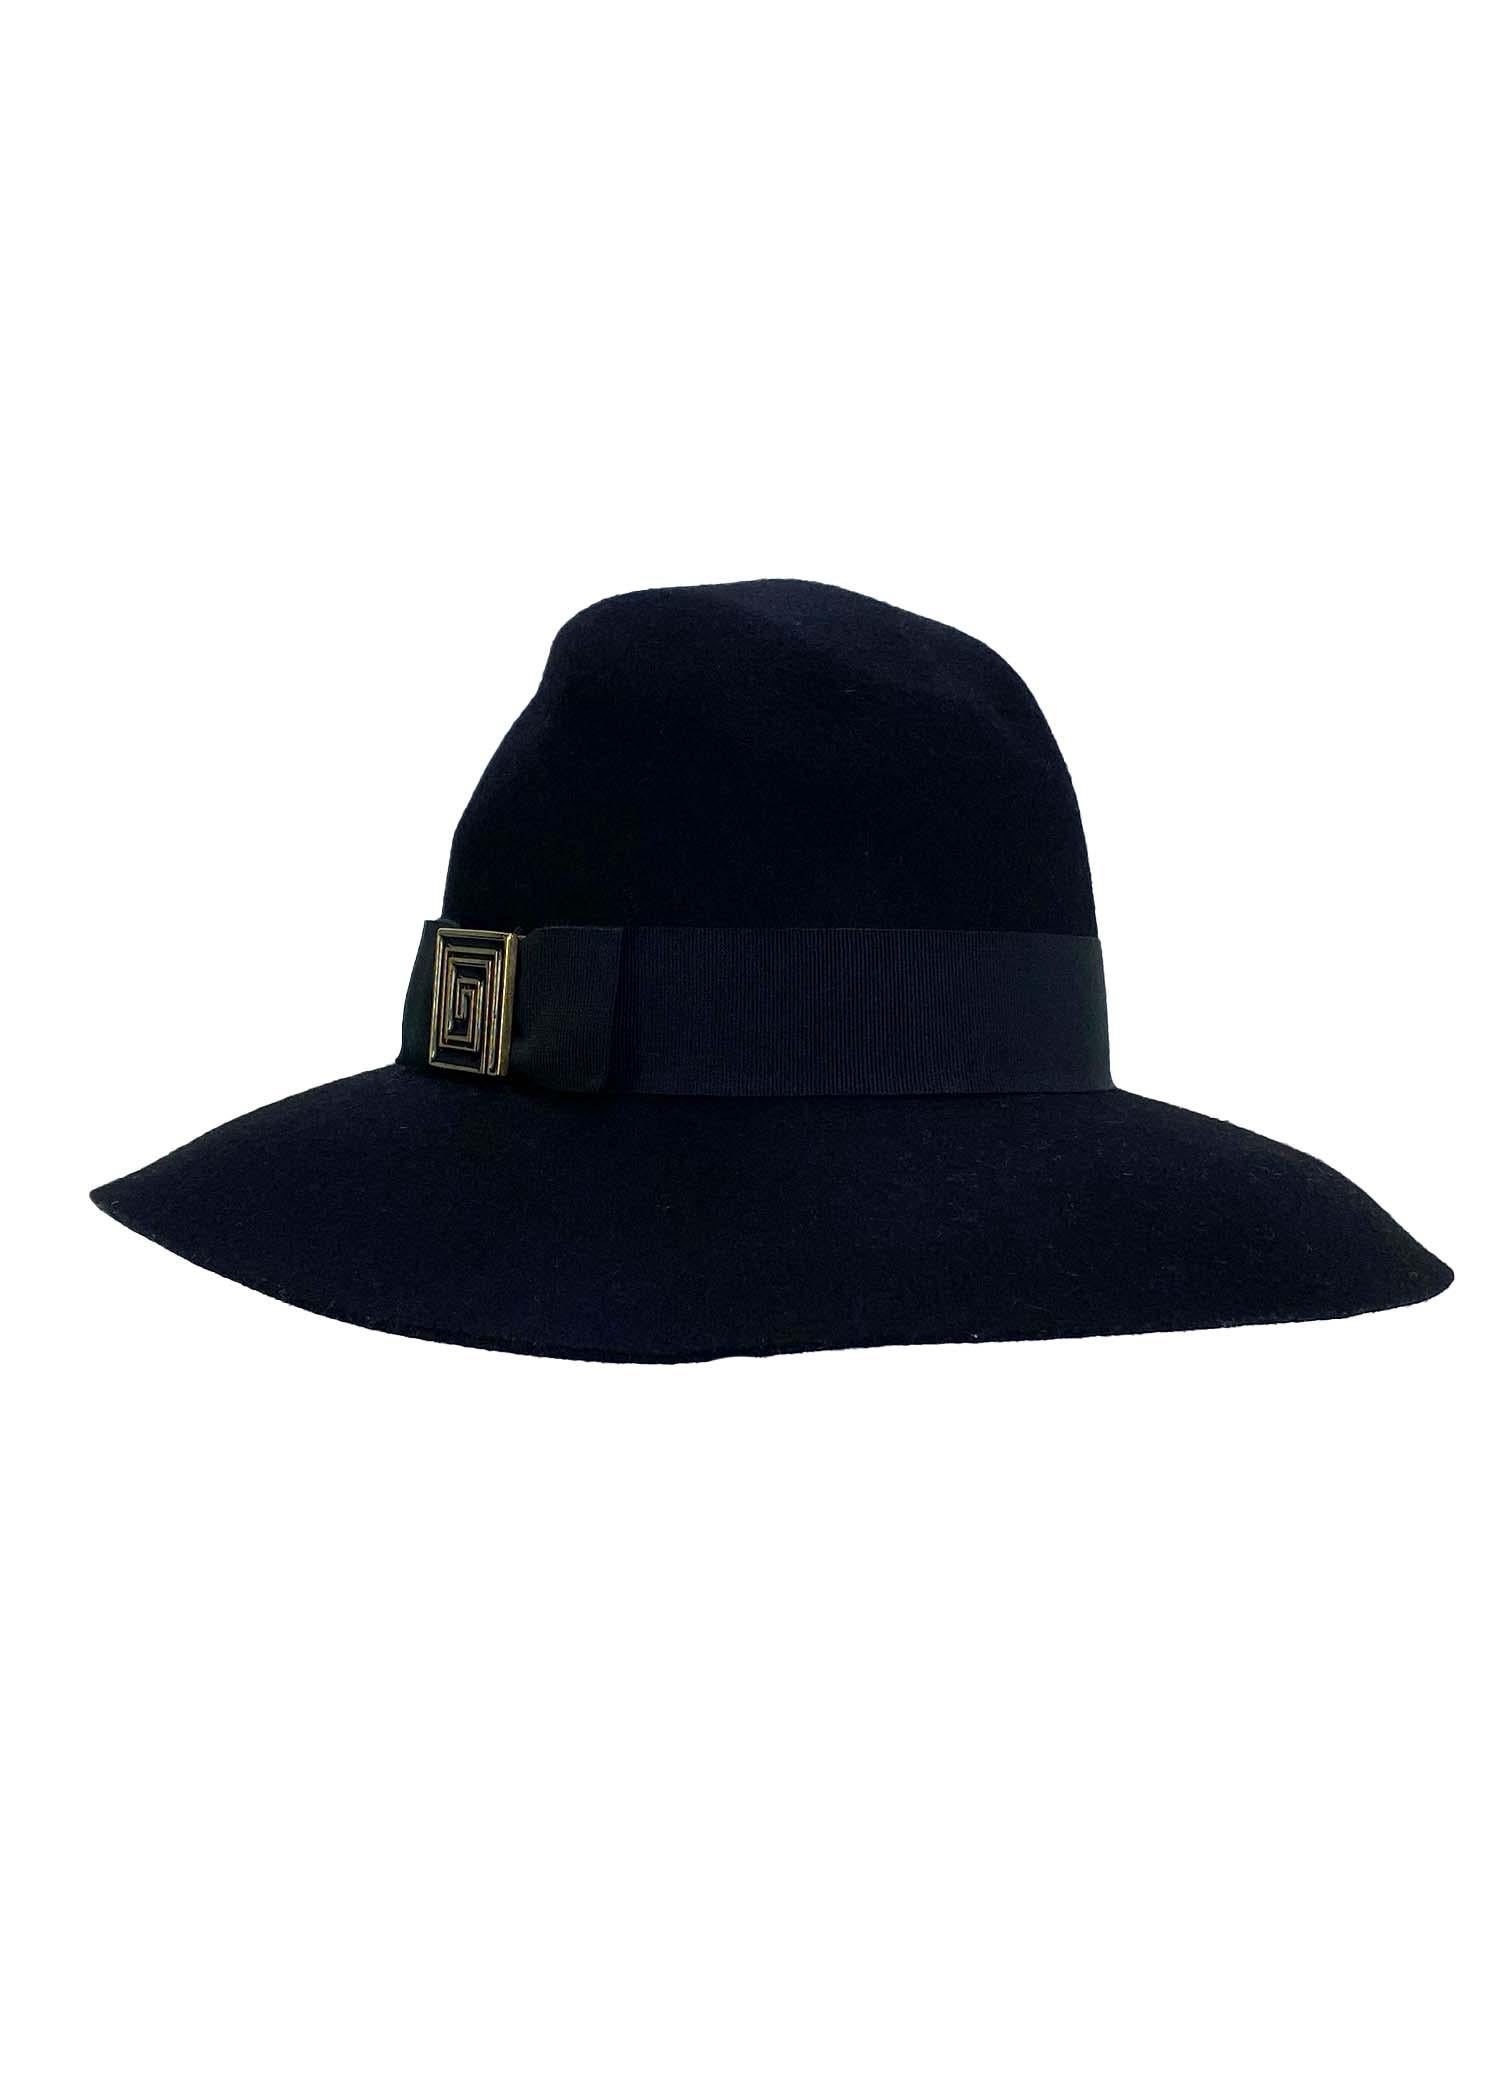 Presenting a versatile floppy Gianni Versace hat, designed by Donatella Versace. From the early 2000s, this hat can be worn down as a floppy hat or with the brim turned up for a more structured look. The ribbon around the base of the hat is